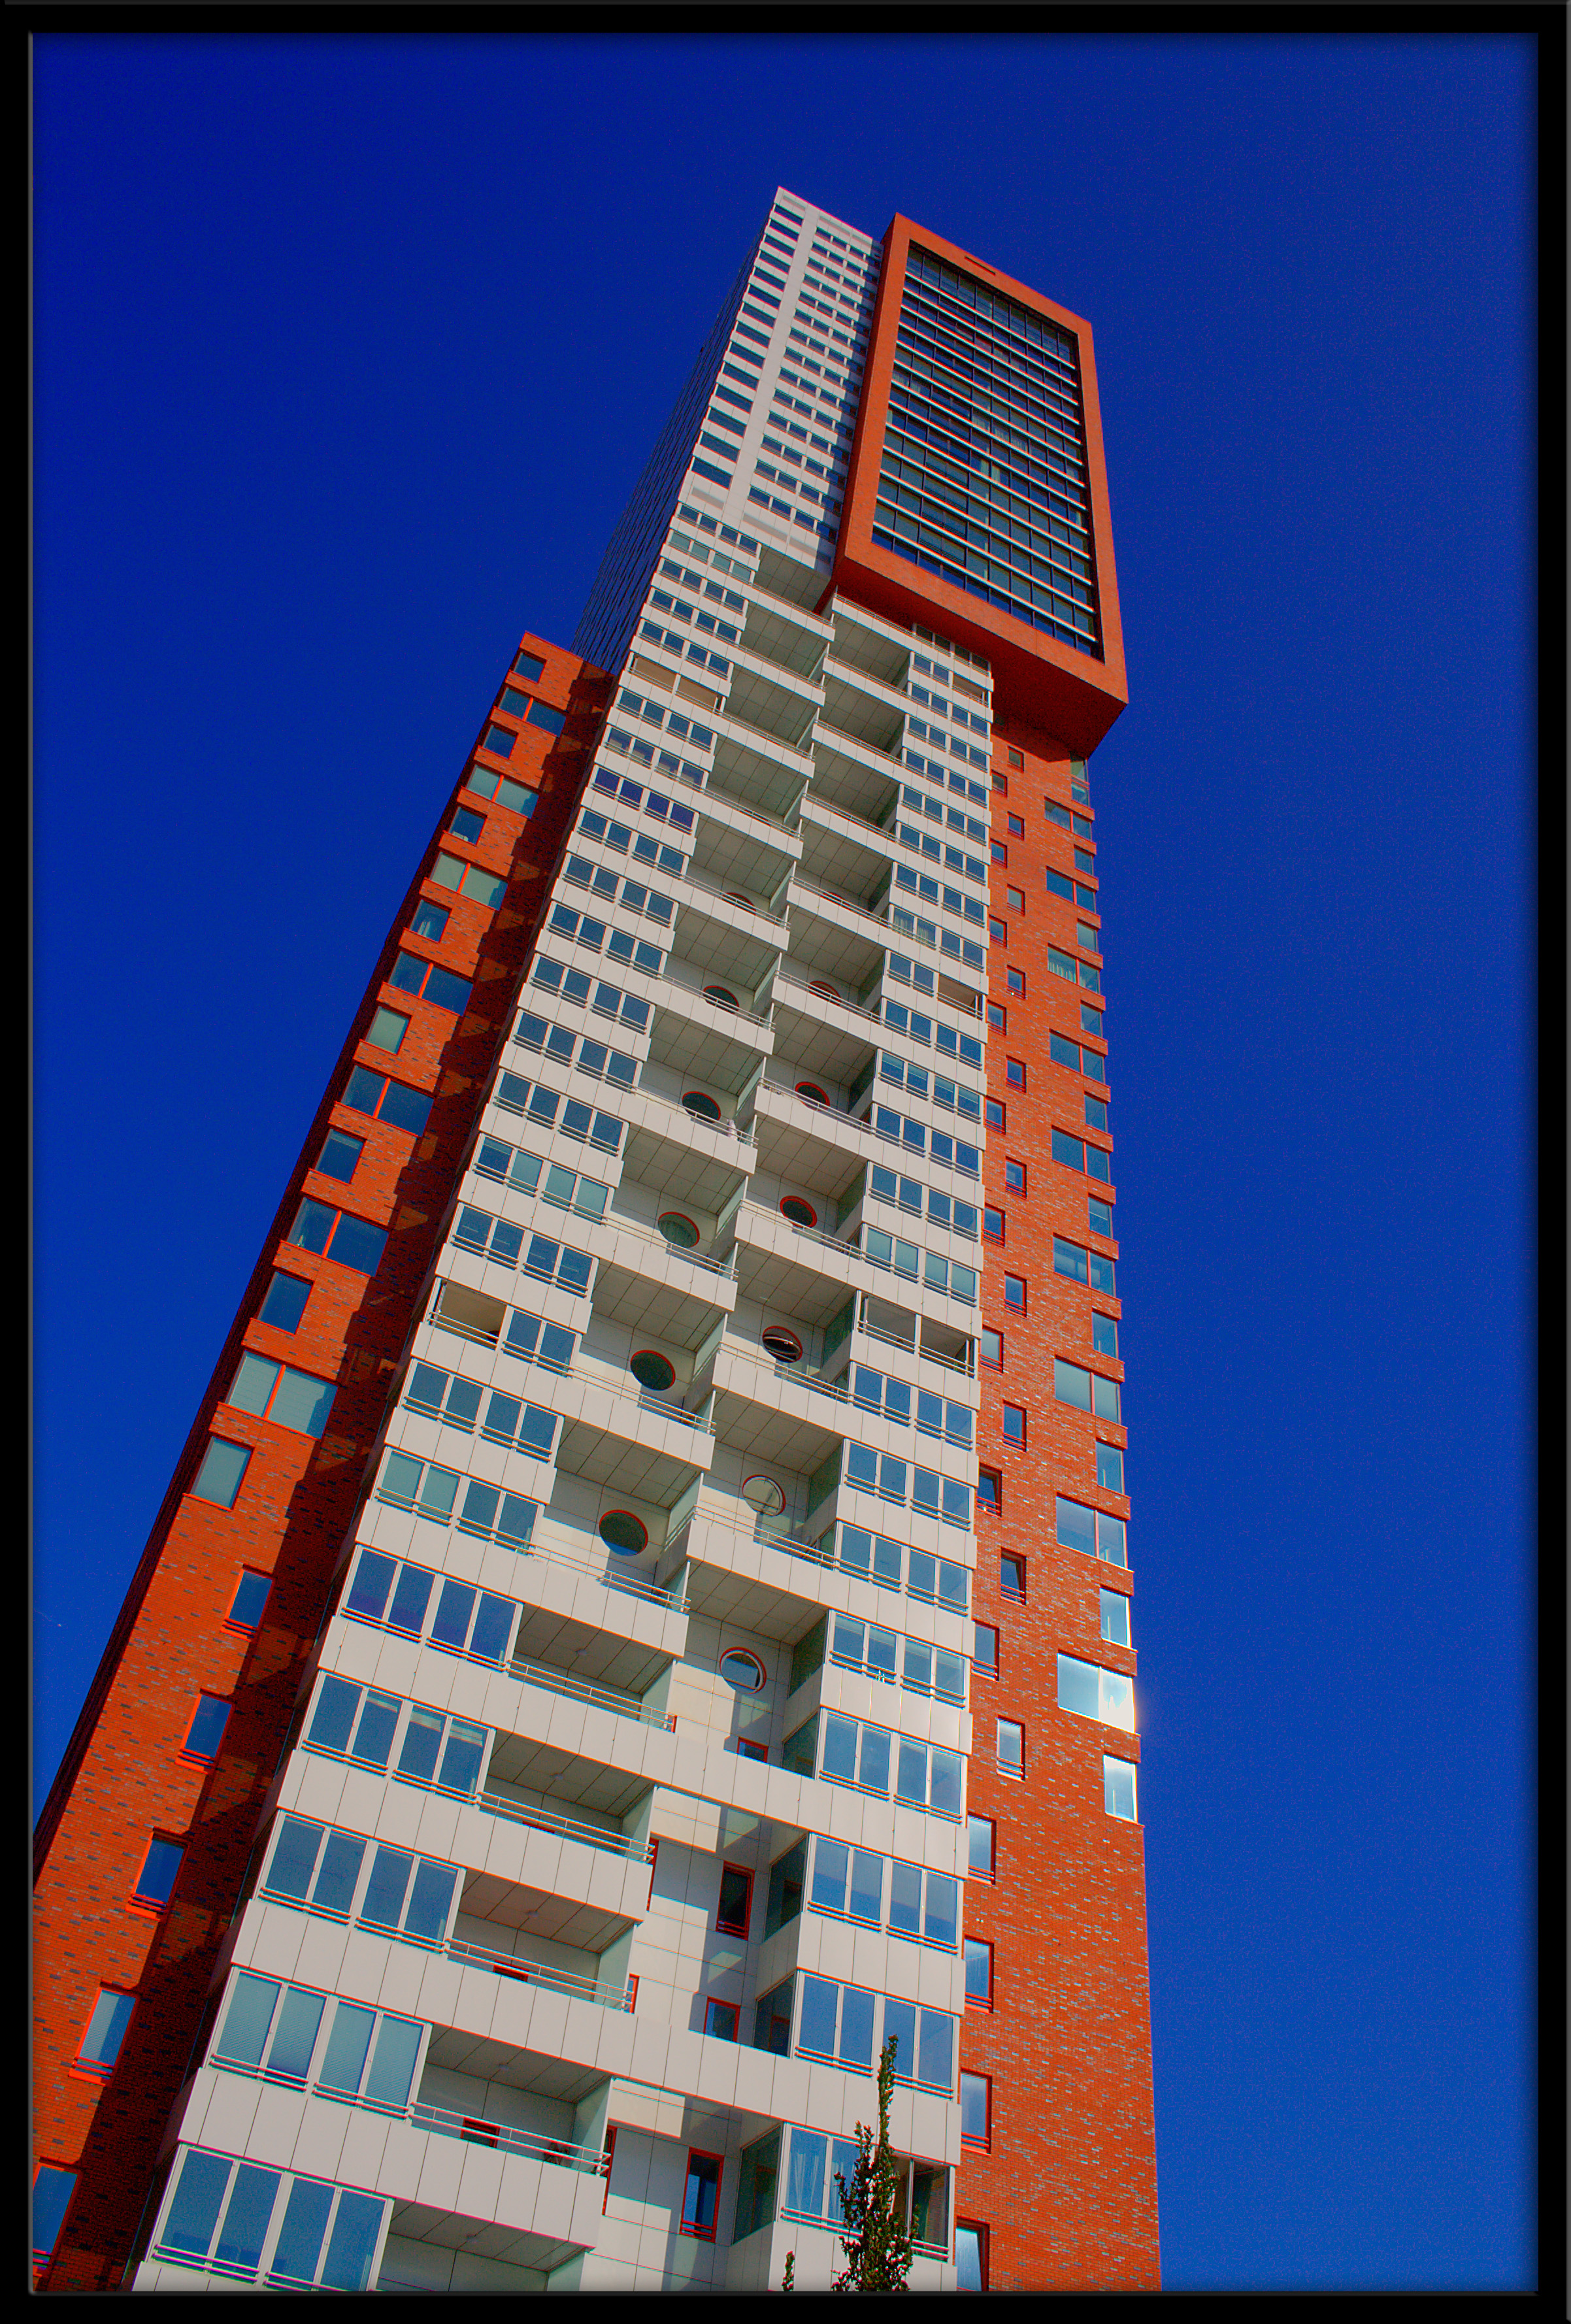 Montevideo tower